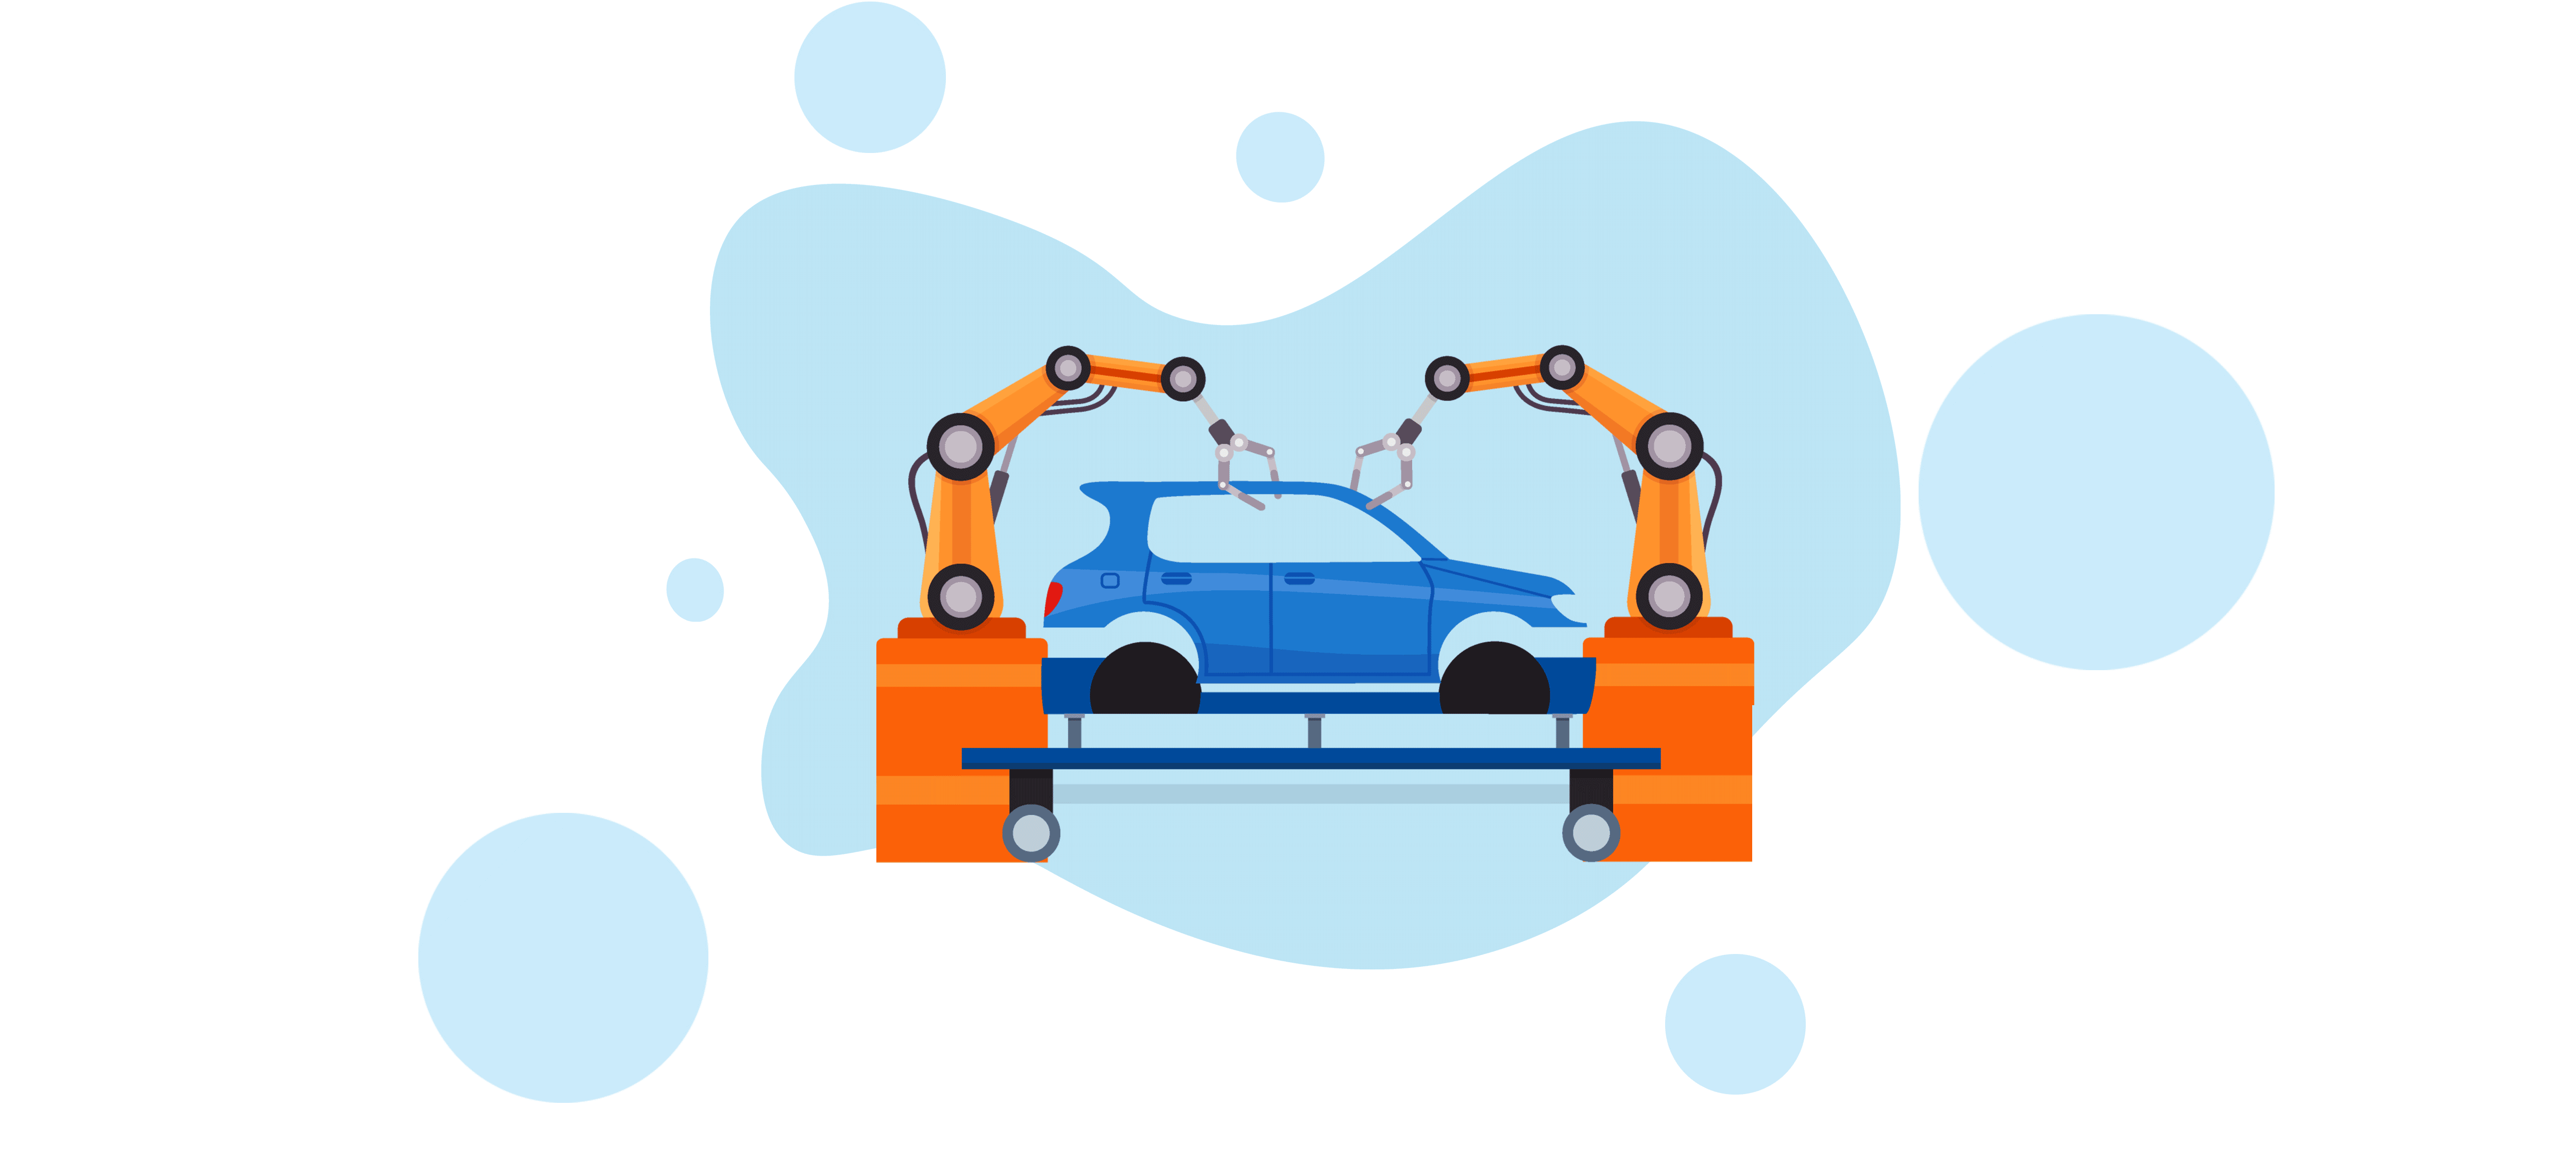 An illustration of a car being made with robot arms assembling parts.